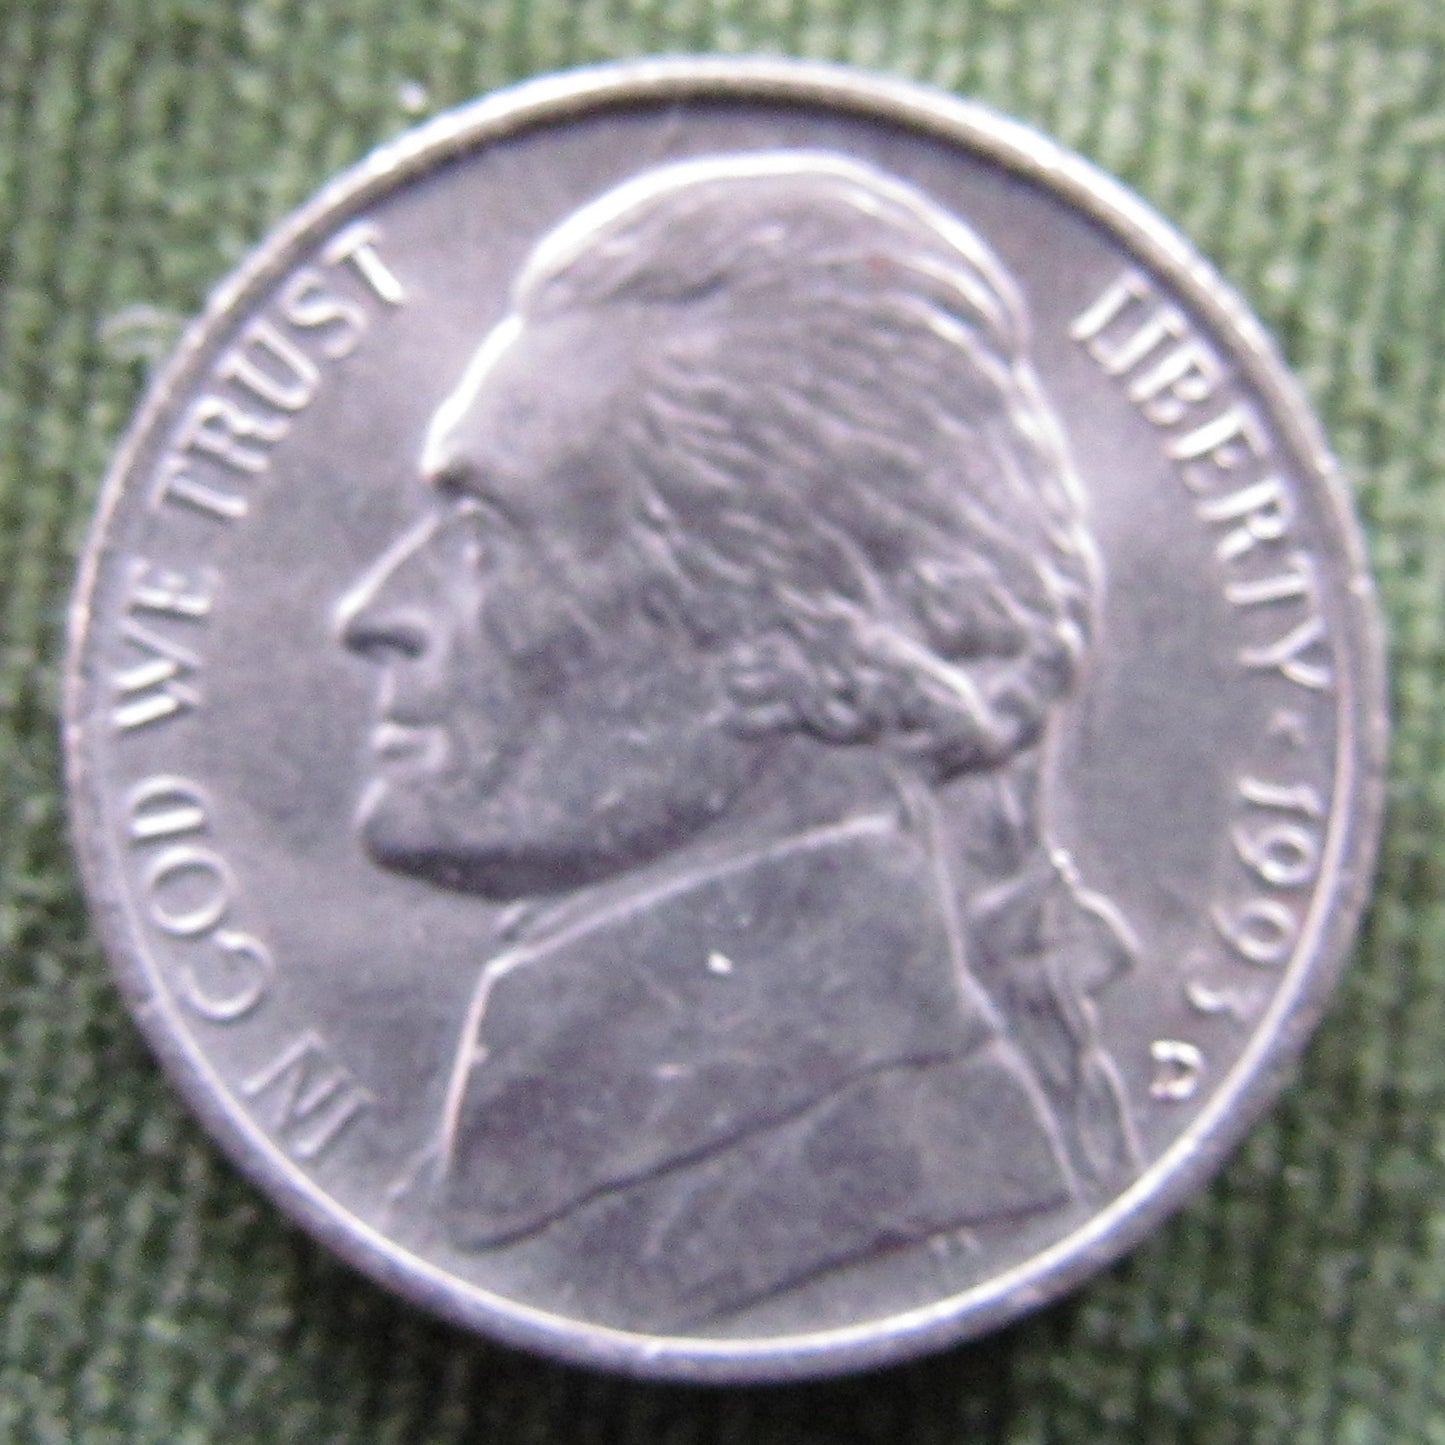 USA American 1993 D Nickel Jefferson Coin - Circulated